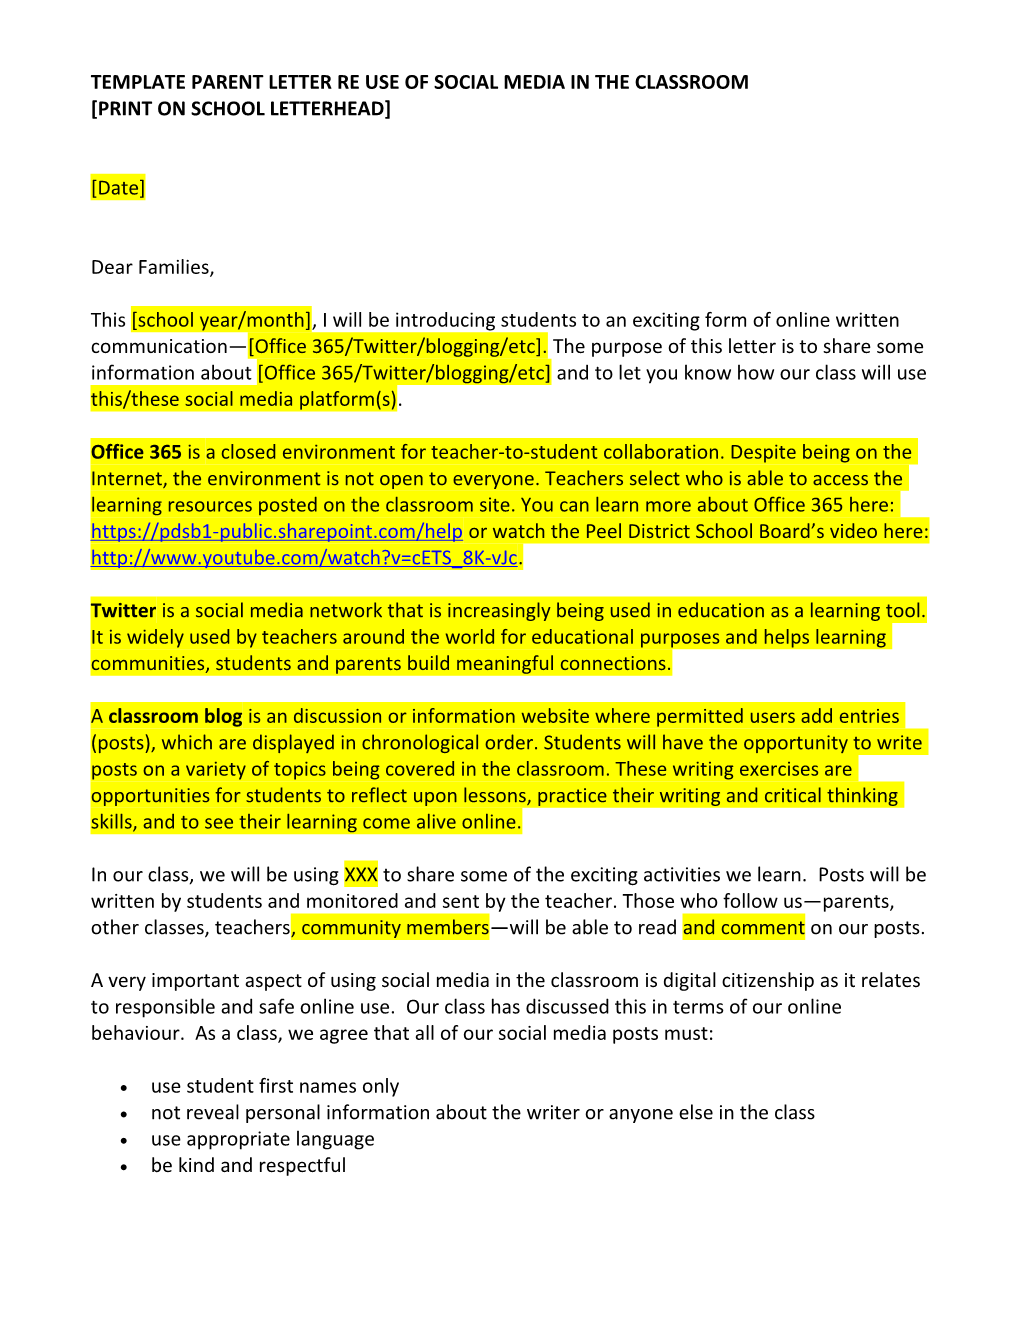 Template Parent Letter Re Use of Social Media in the Classroom